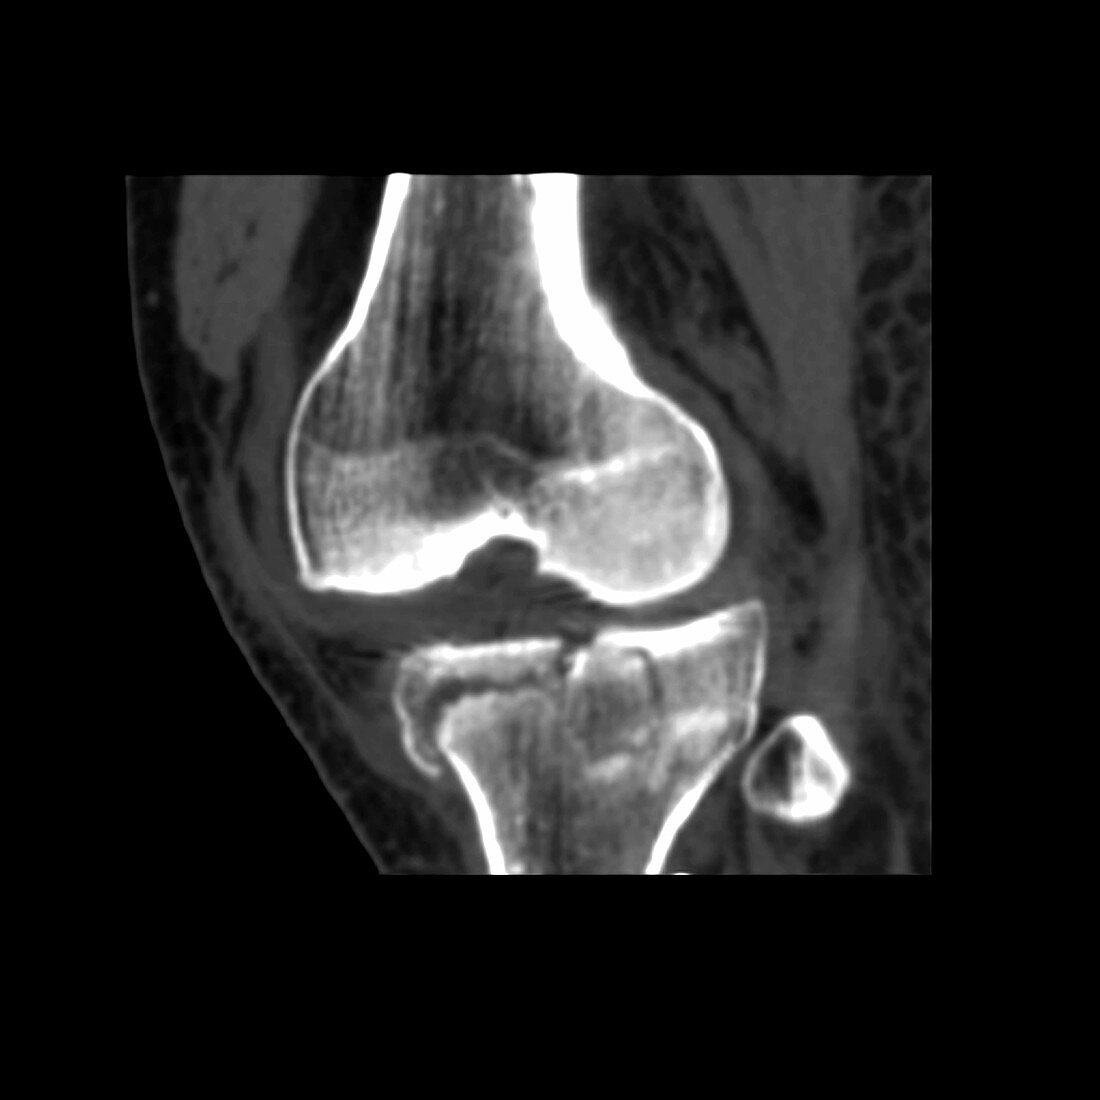 Computer Reconstruction of the Knee